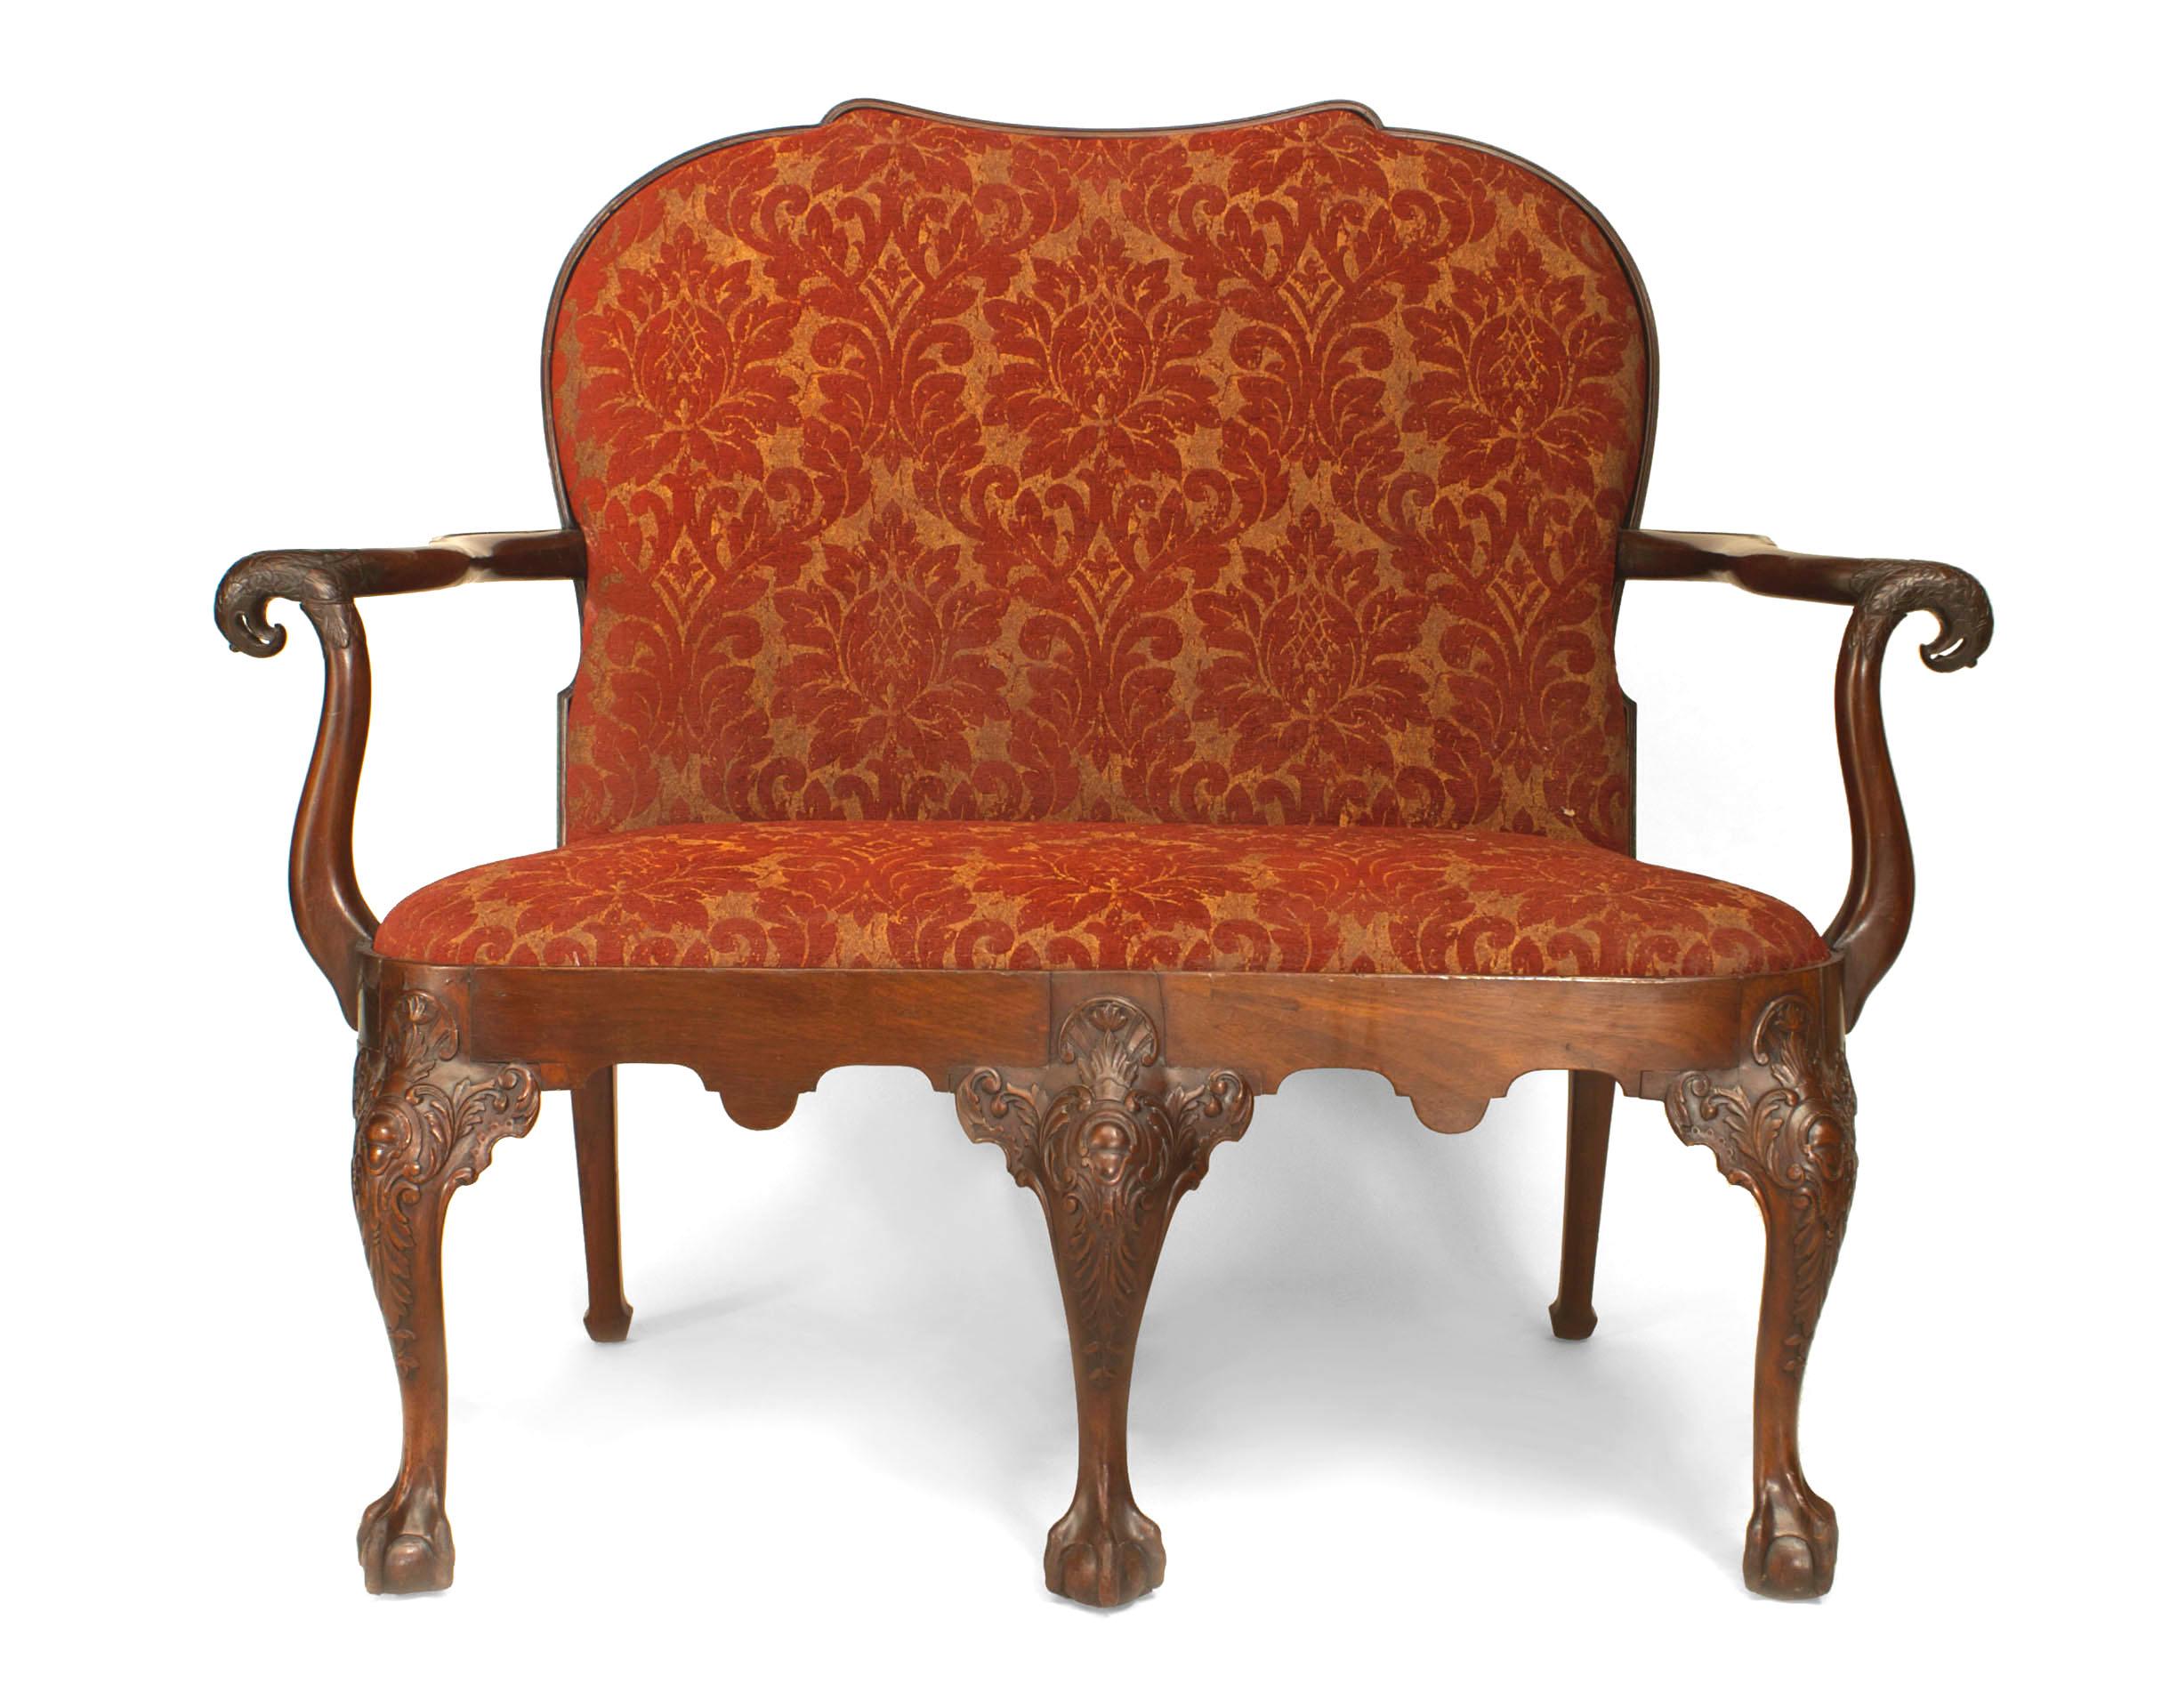 English Chippendale style (18th-19th century) mahogany loveseat with eagle head arms and upholstered seat and back.
 